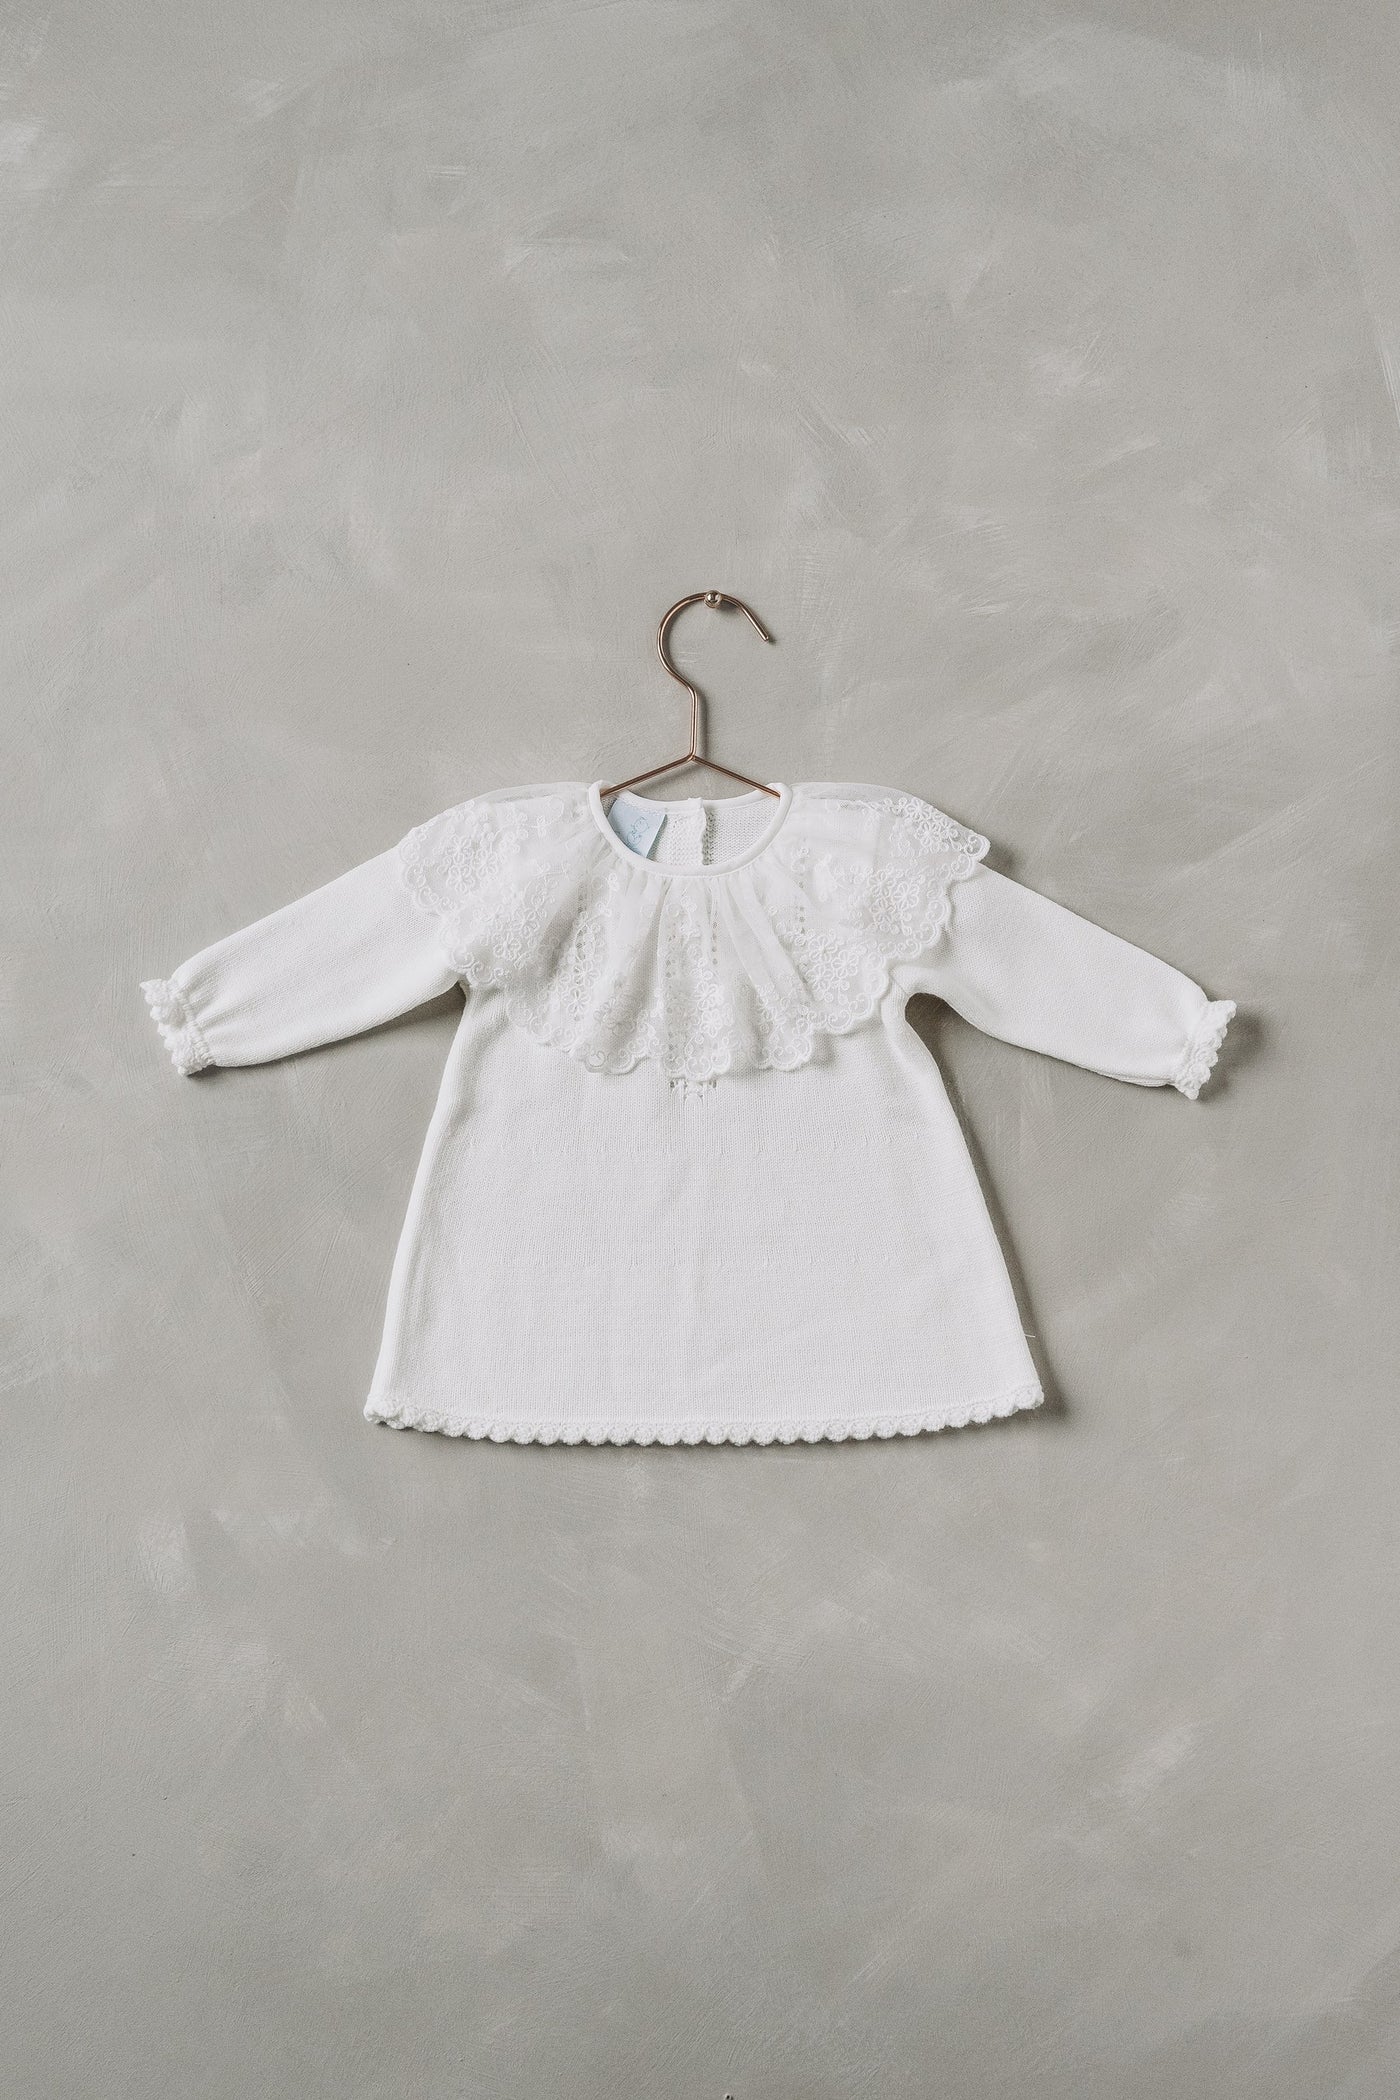 Knitted White  Baby Girls Dress with Lace Embroidered Collar